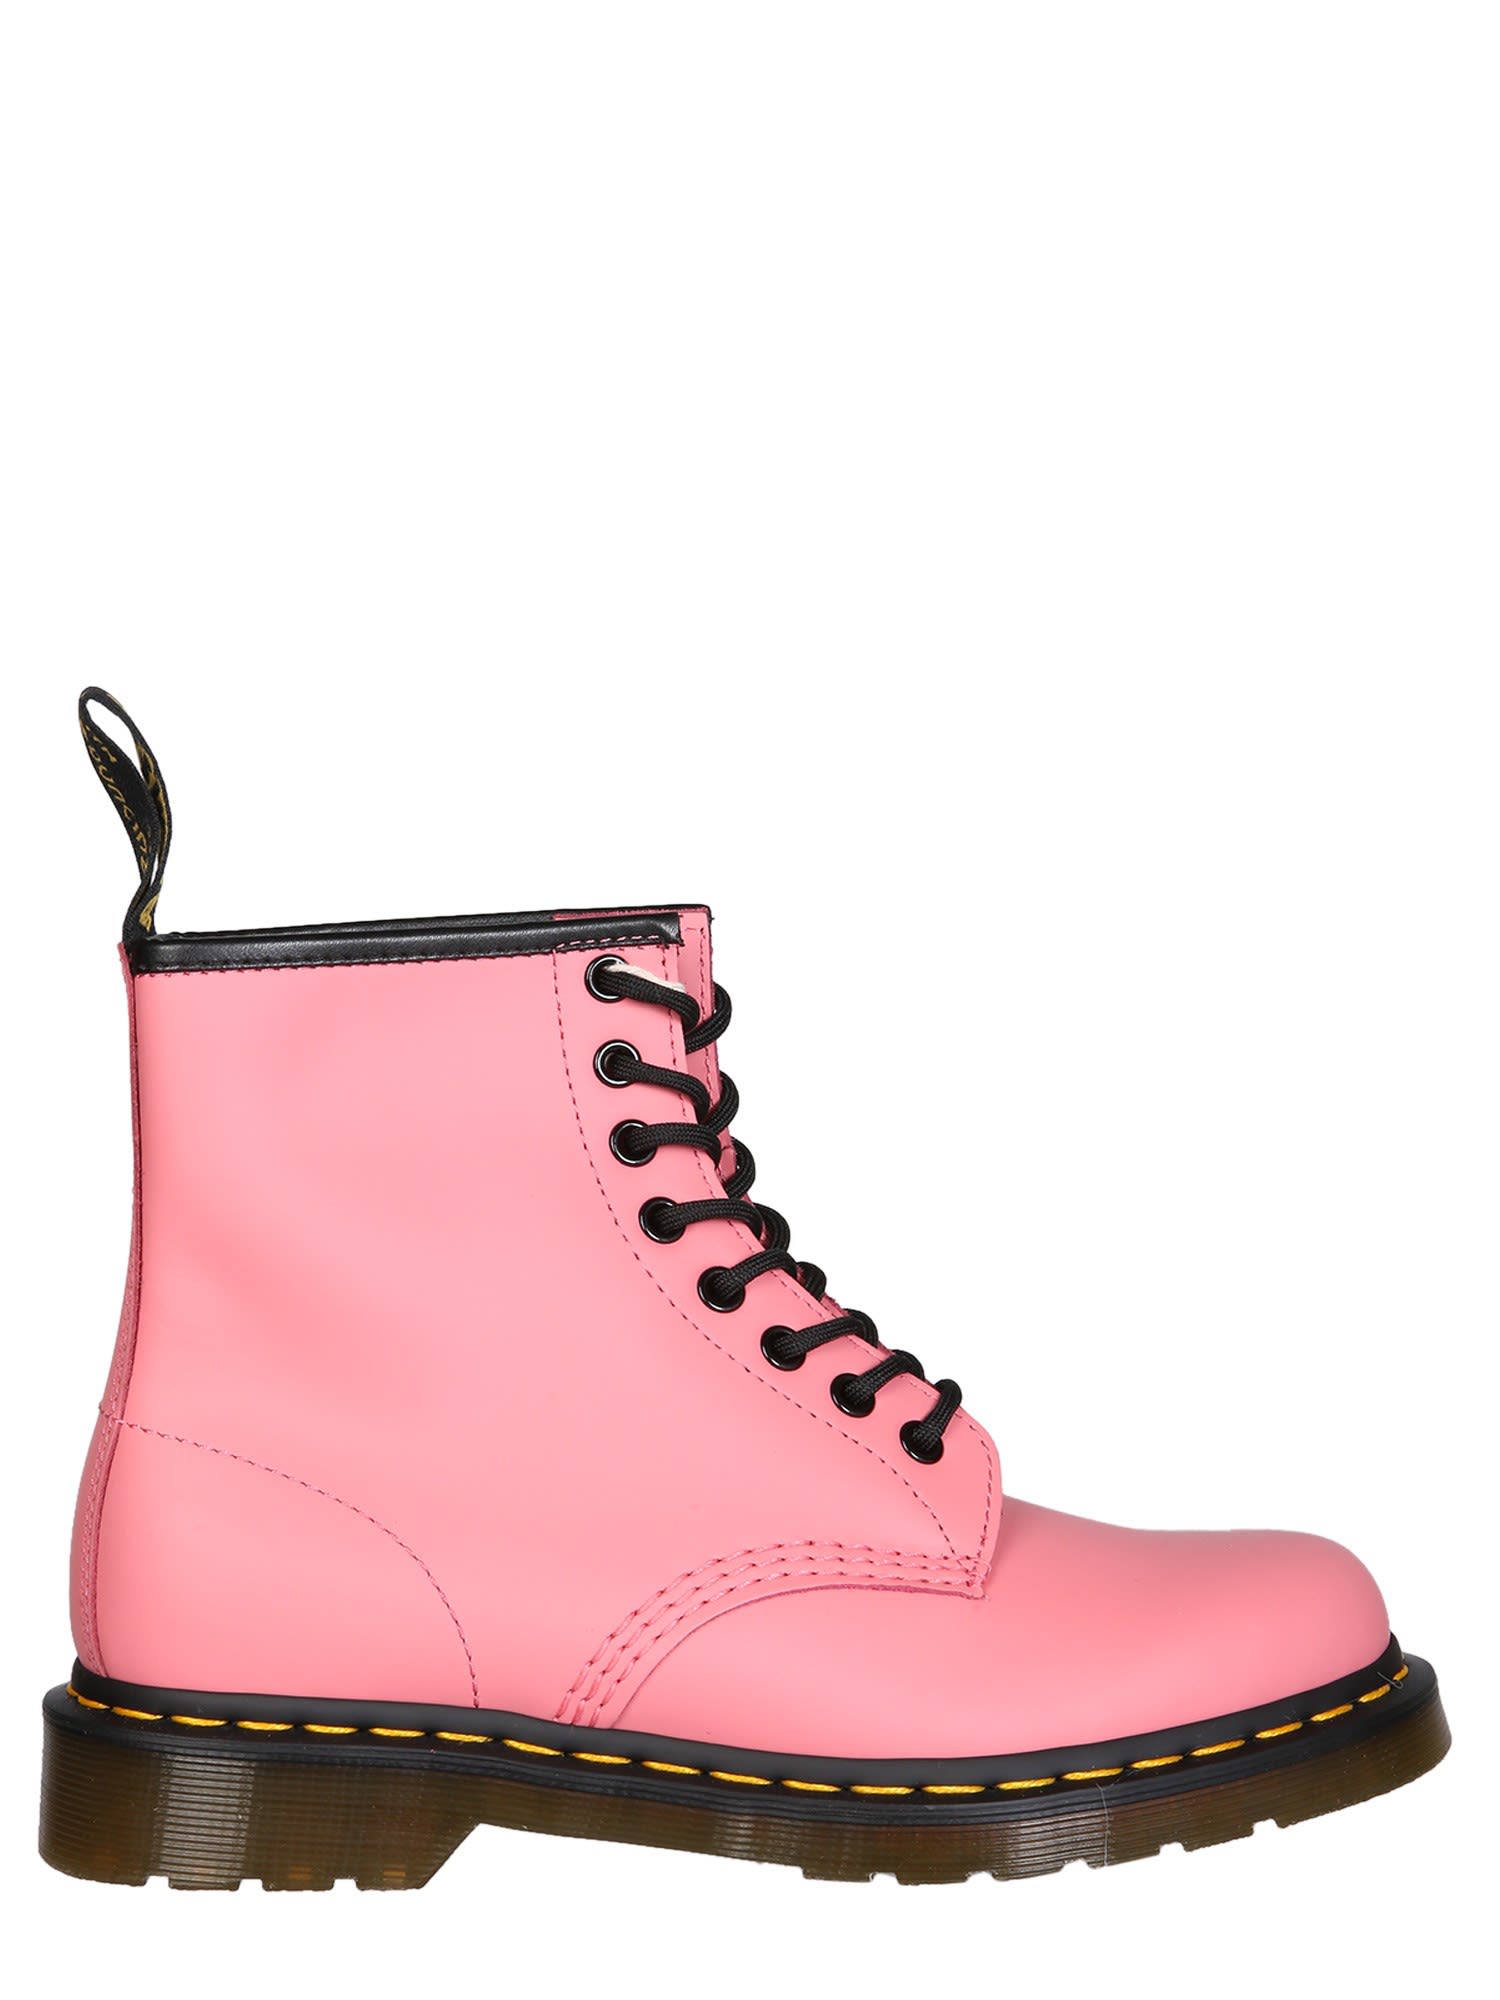 Buy Dr. Martens 1460 Amphibio online, shop Dr. Martens shoes with free shipping